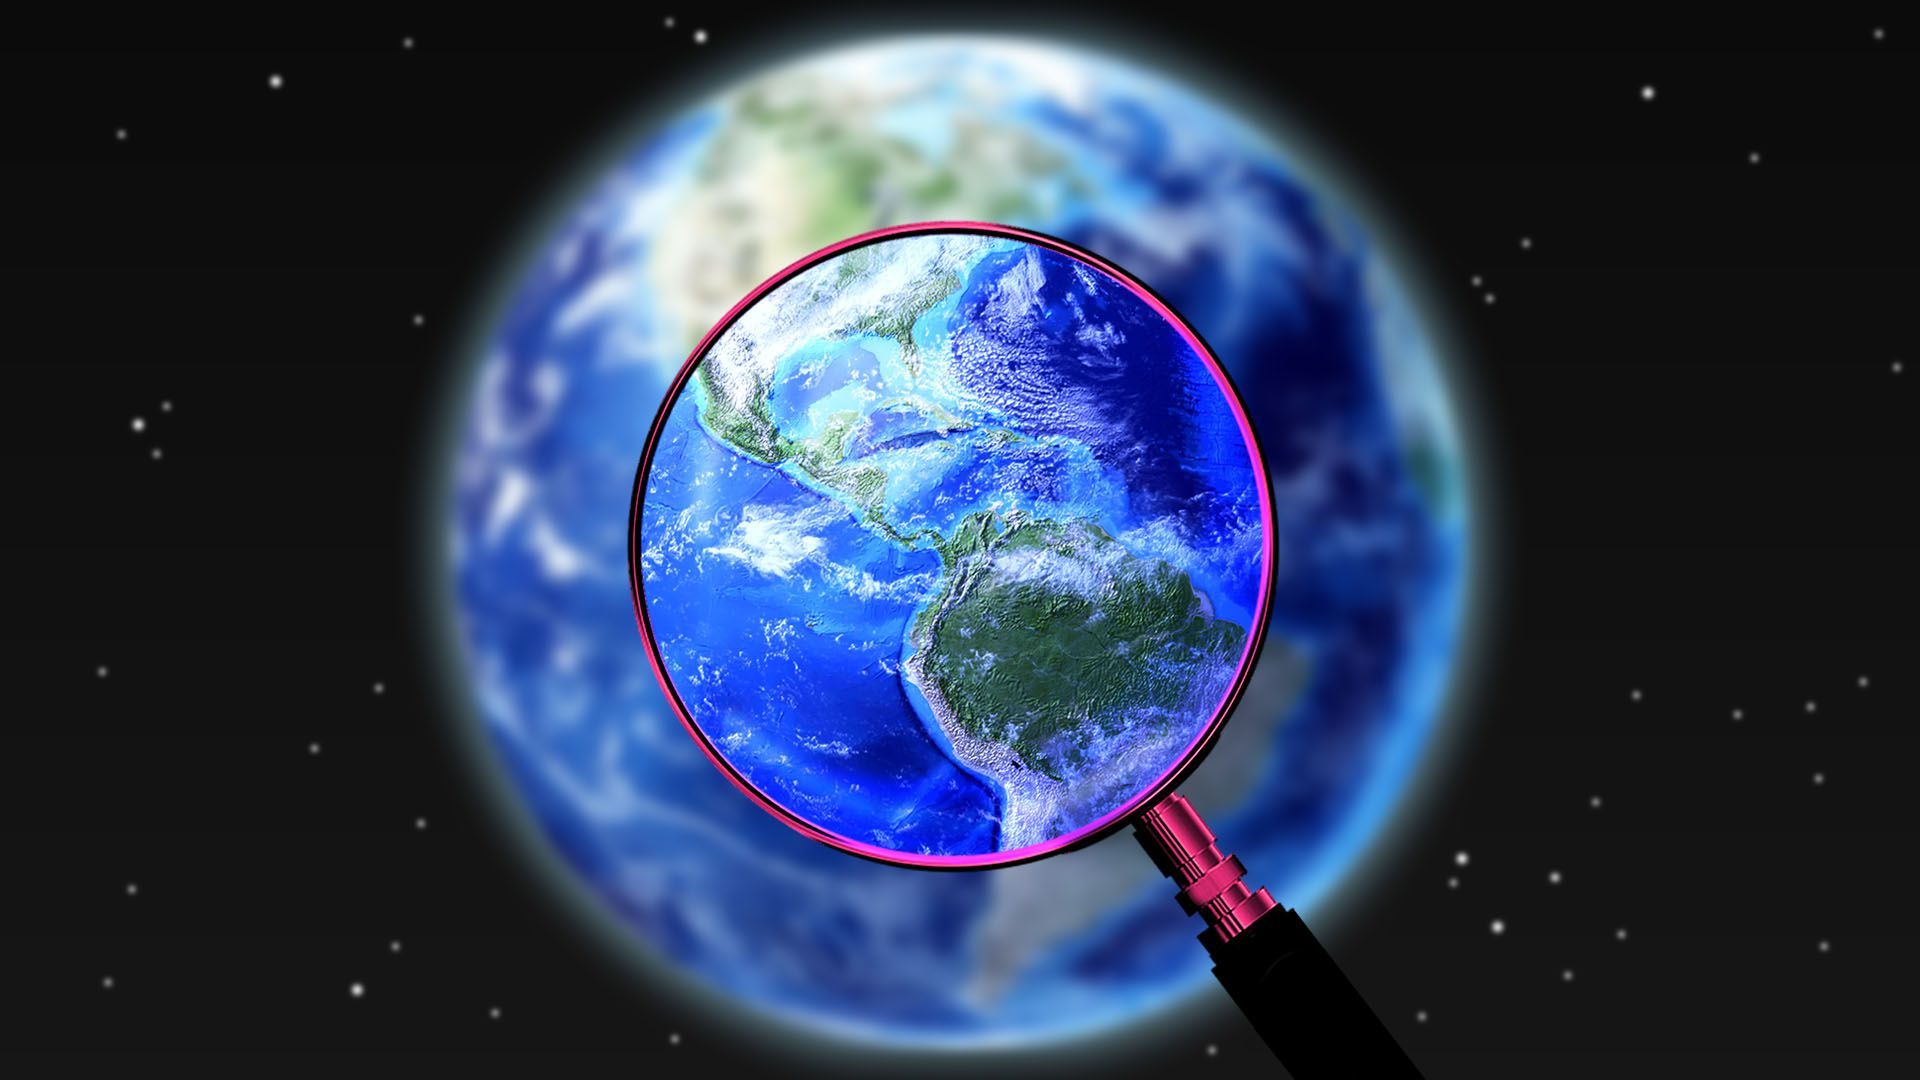 Illustration of a magnifying glass magnifying part of blurring earth